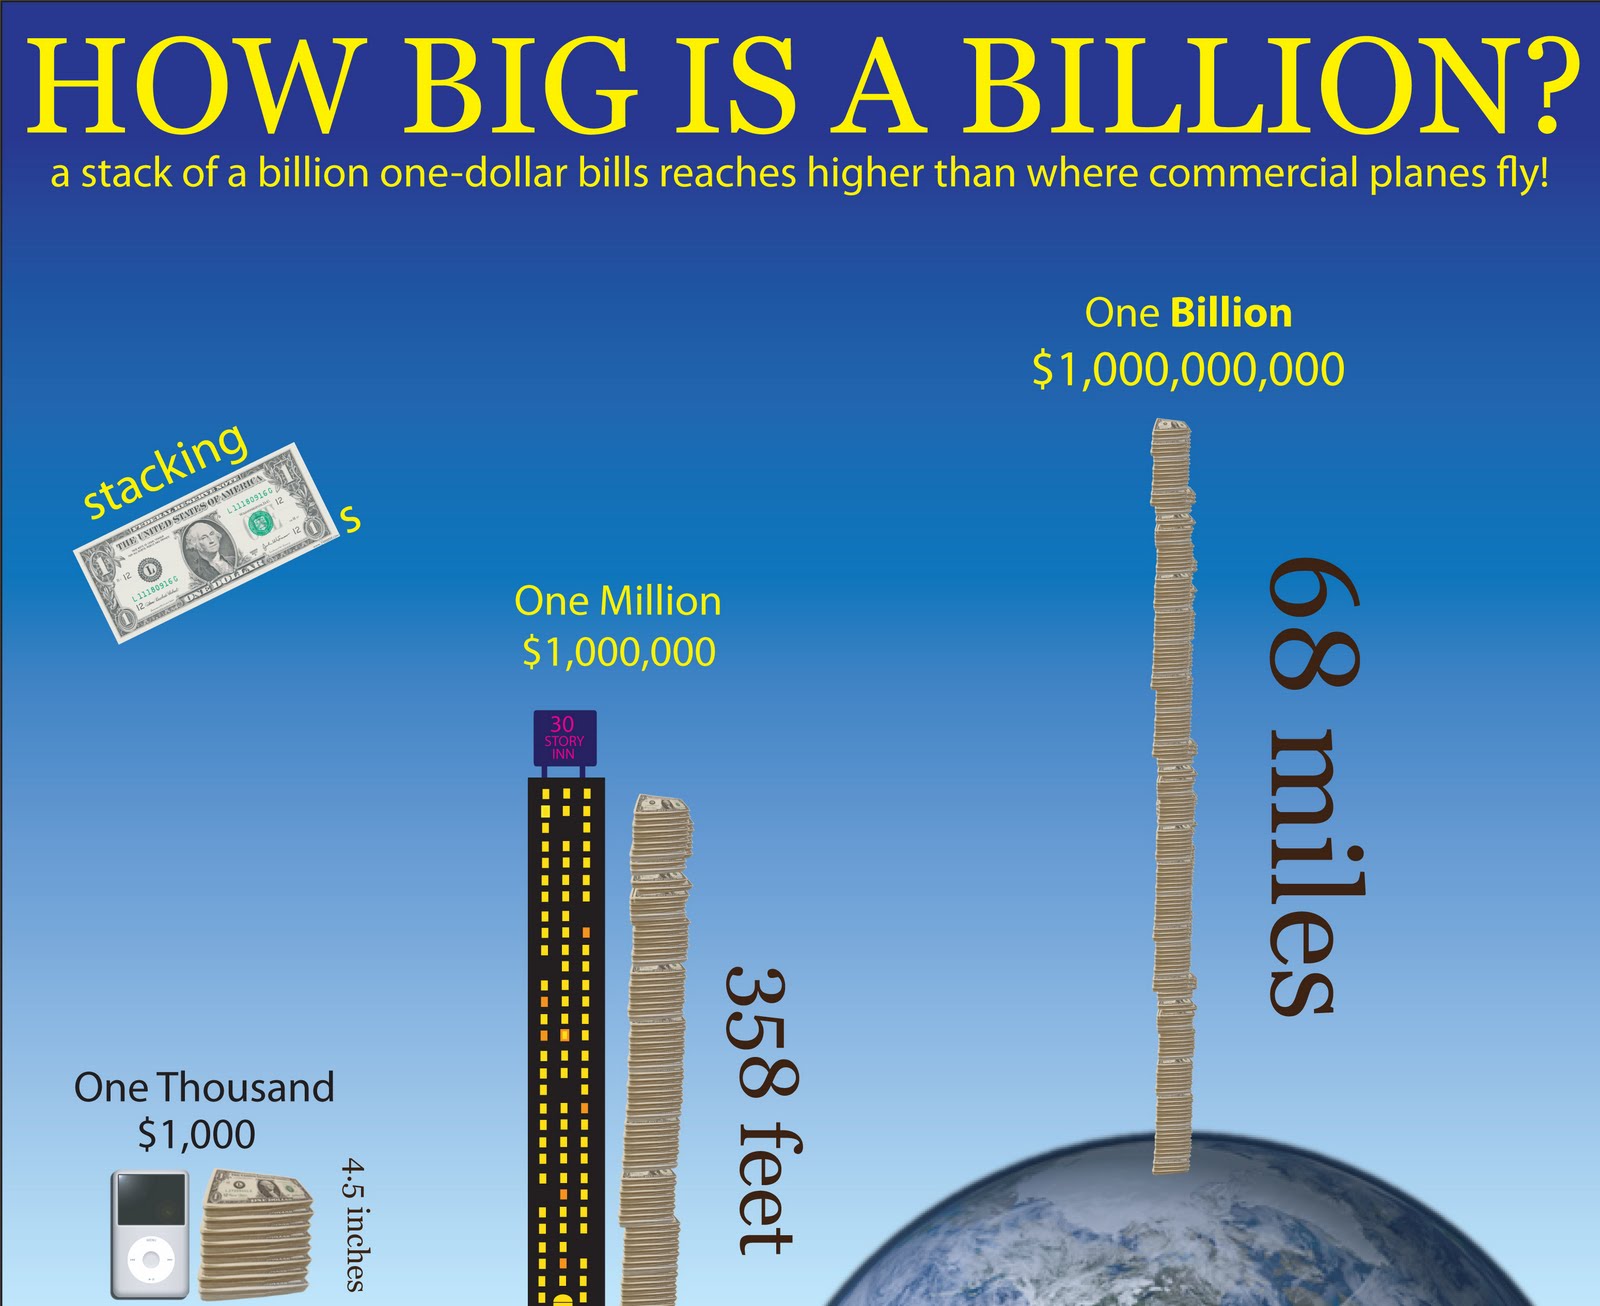 science-museum-of-virginia-question-your-world-so-exactly-how-big